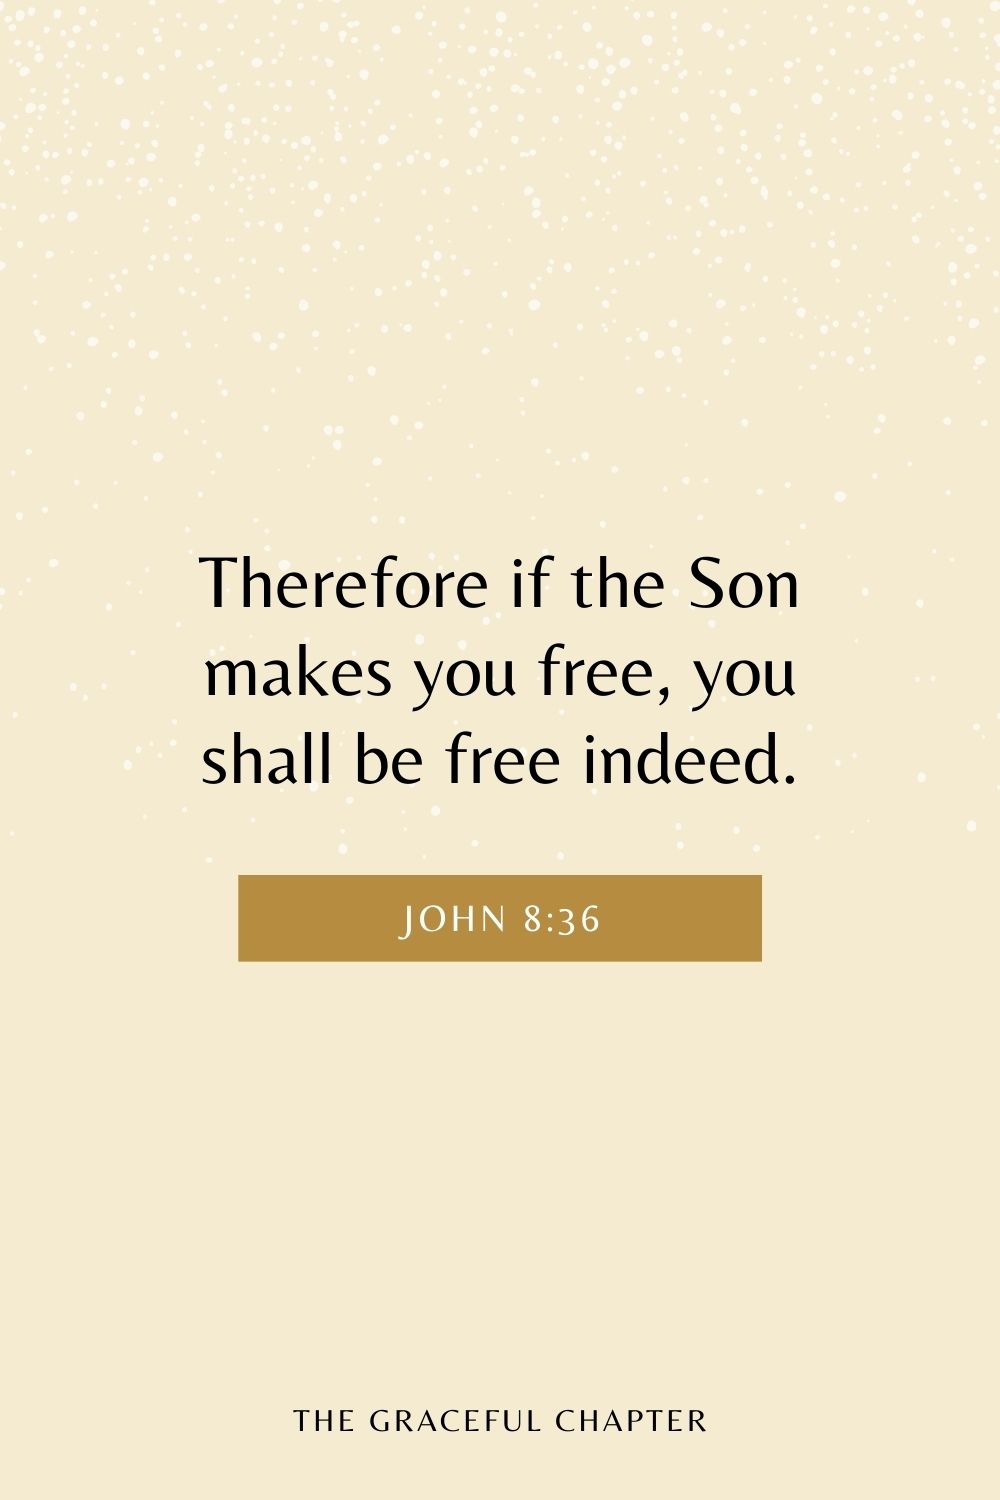 Therefore if the Son makes you free, you shall be free indeed. John 8:36